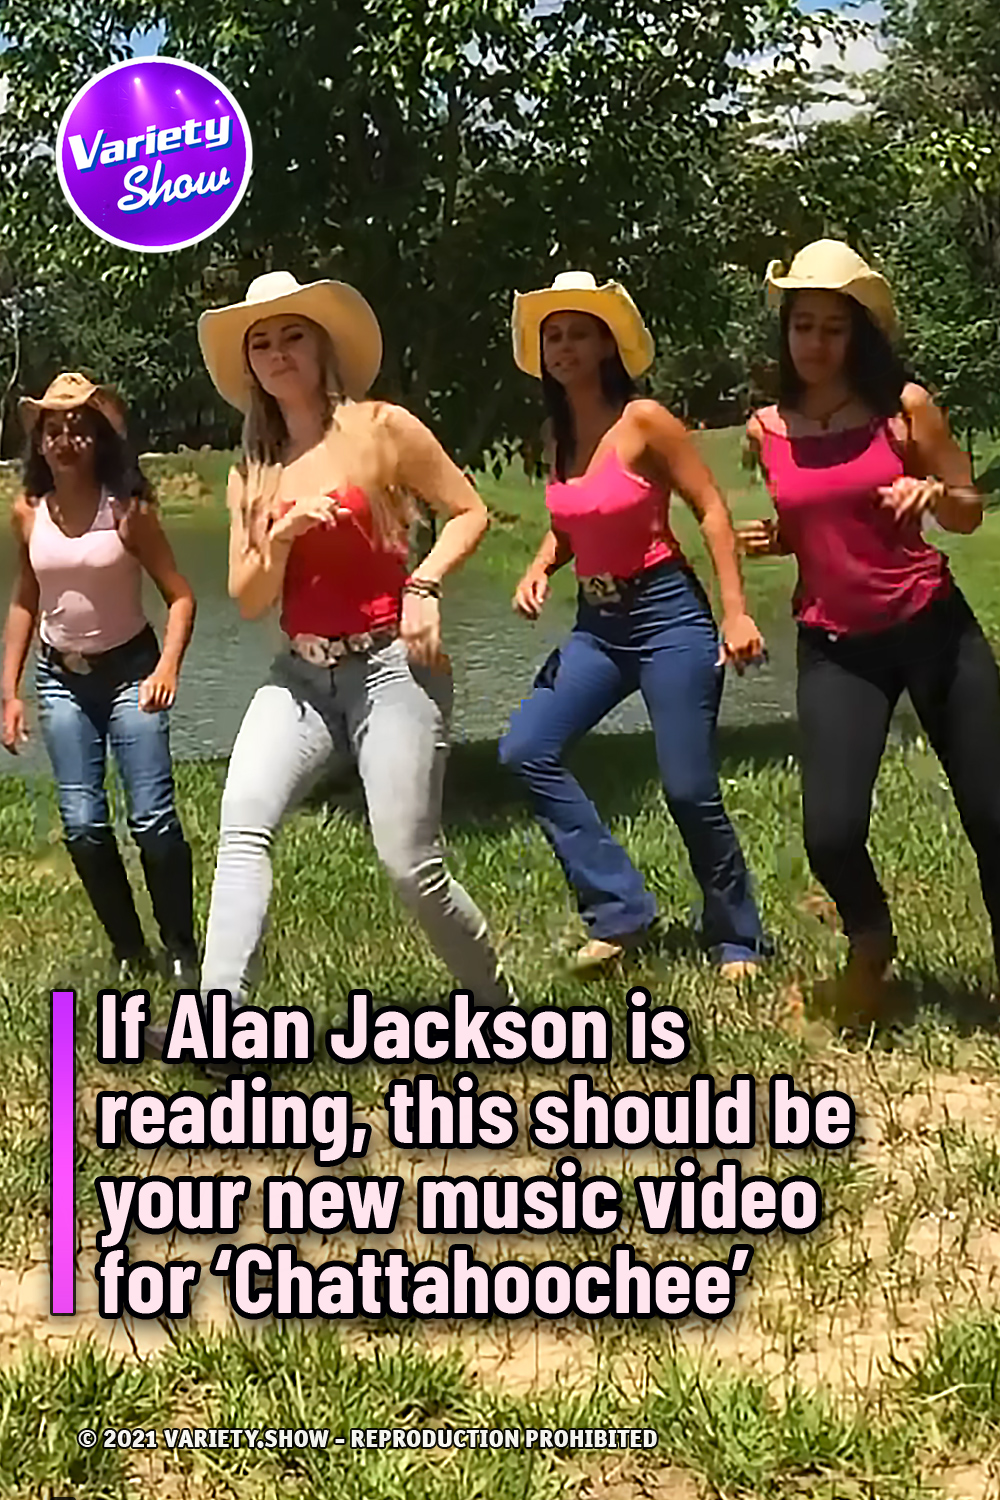 If Alan Jackson is reading, this should be your new music video for ‘Chattahoochee’